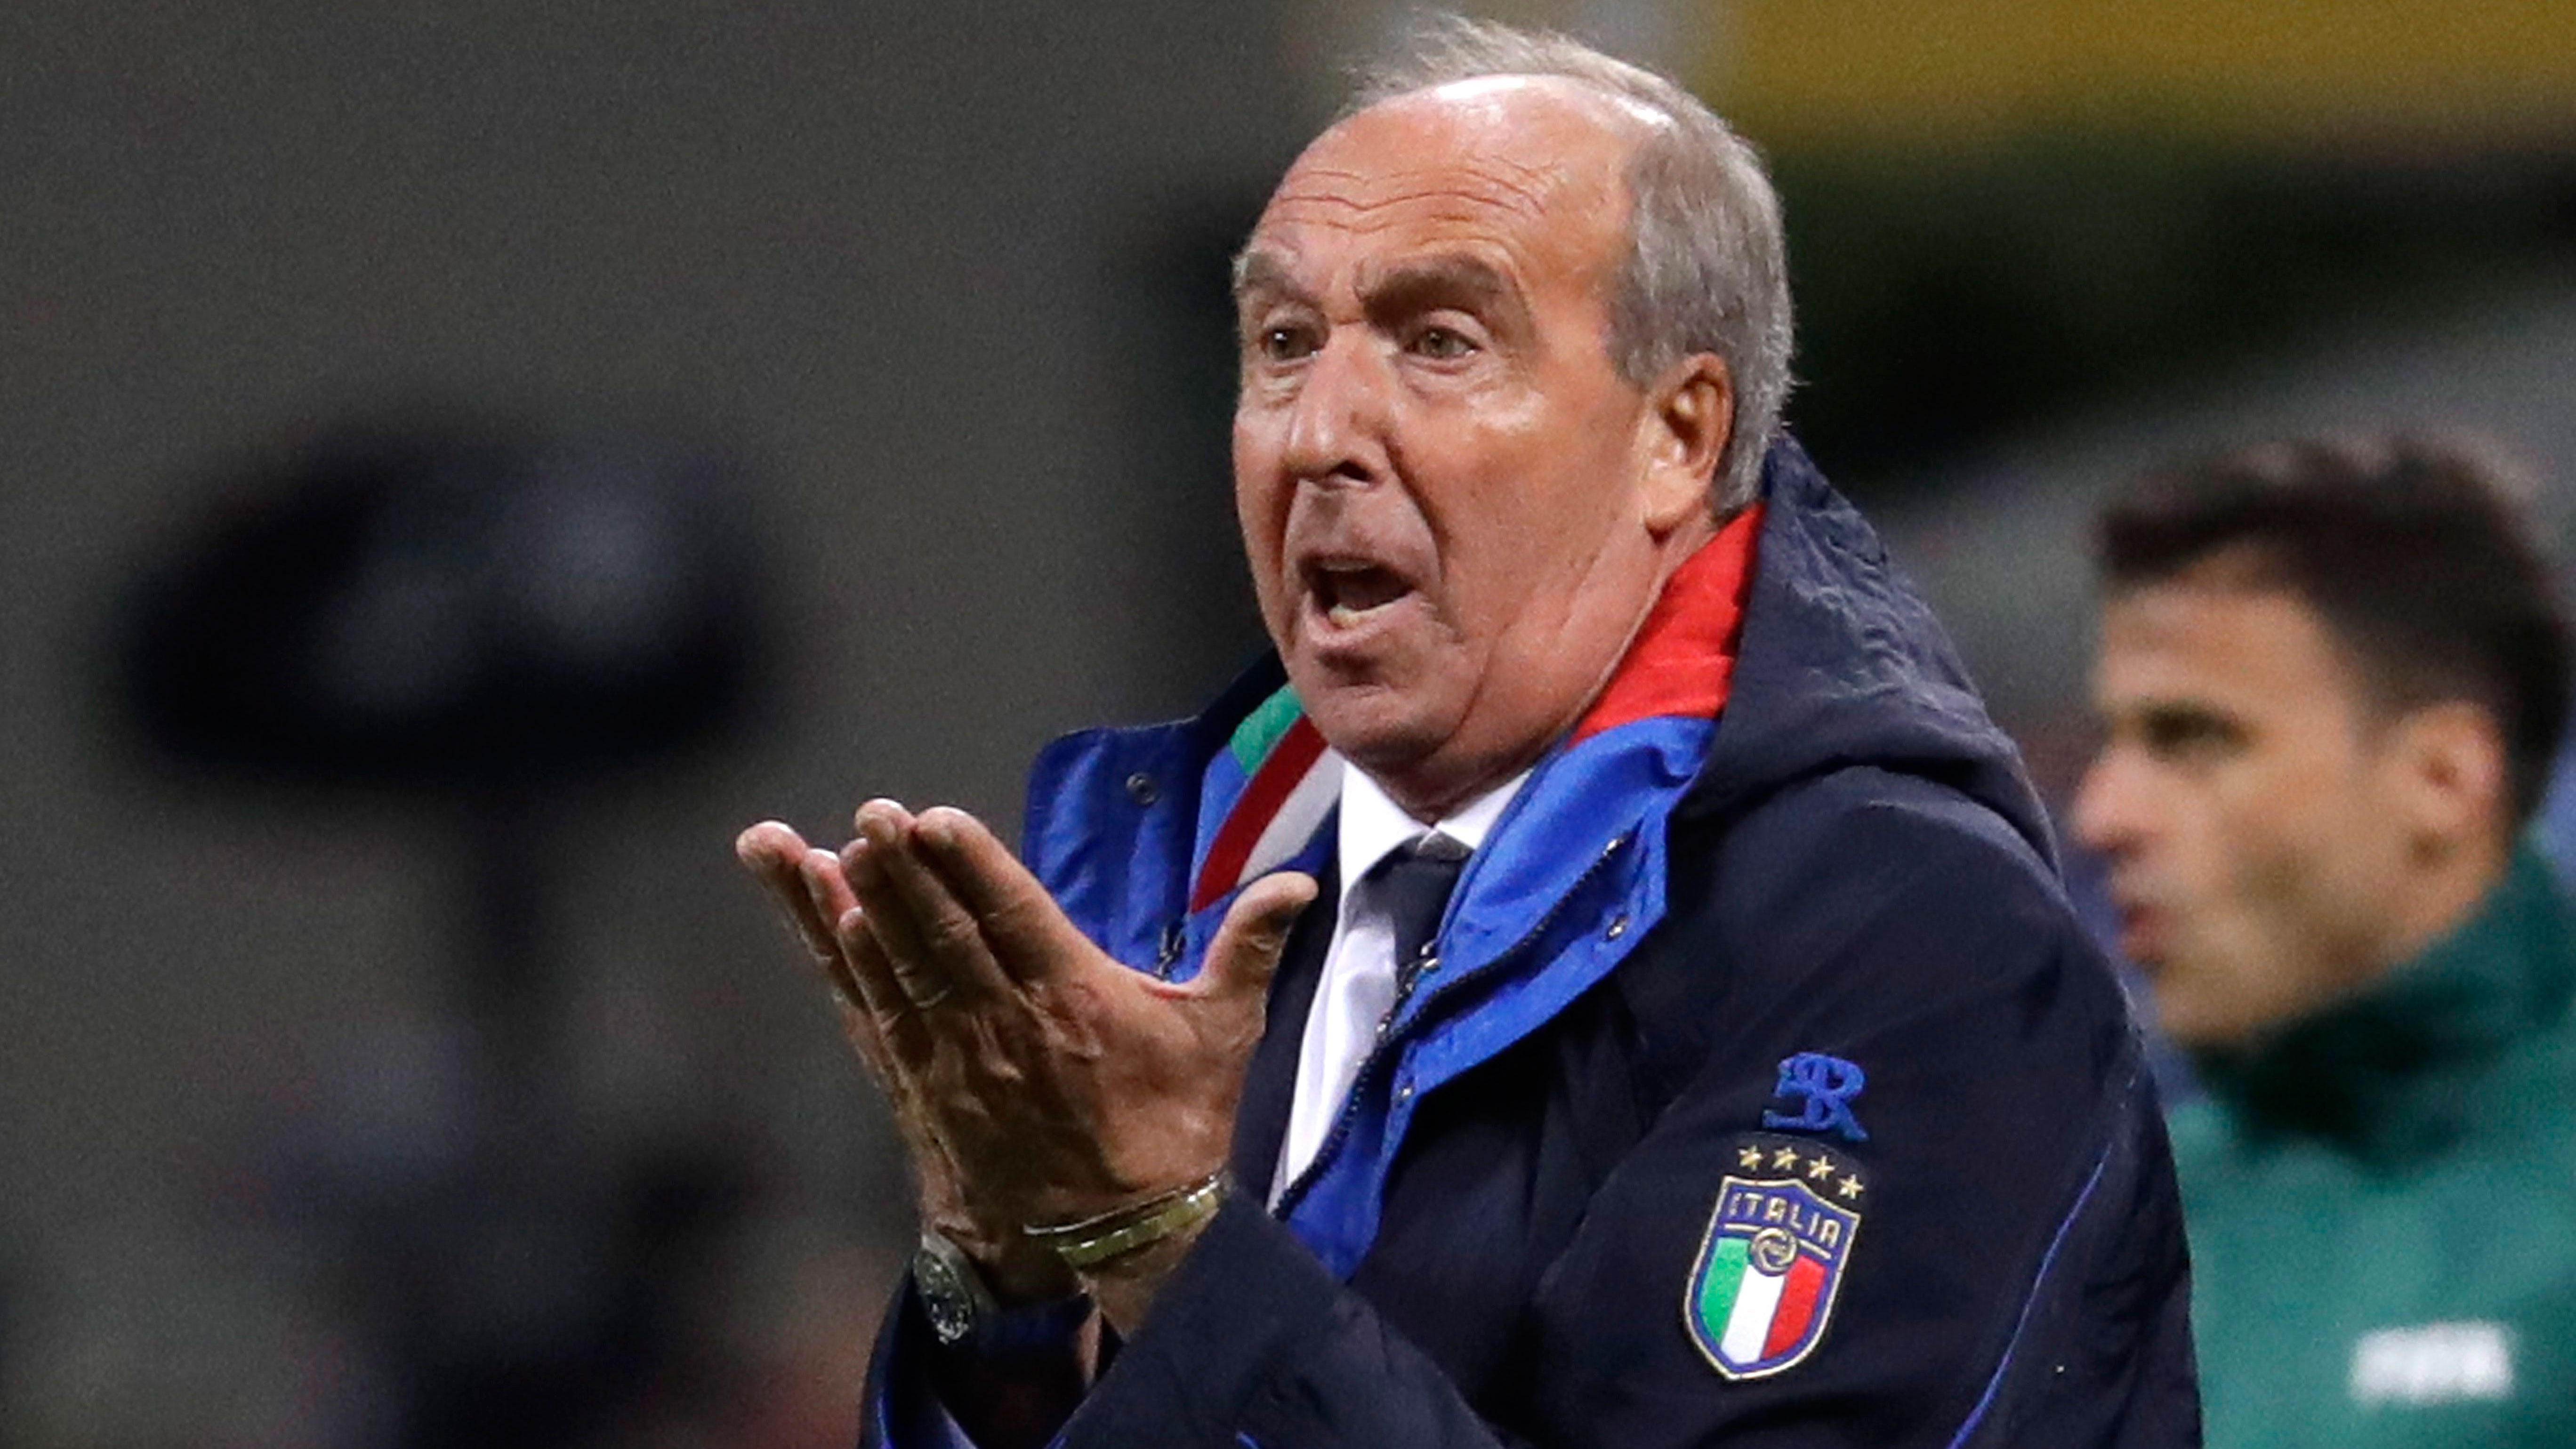 Questionable qualifiers, mismanagement contributed to Italy’s collapse